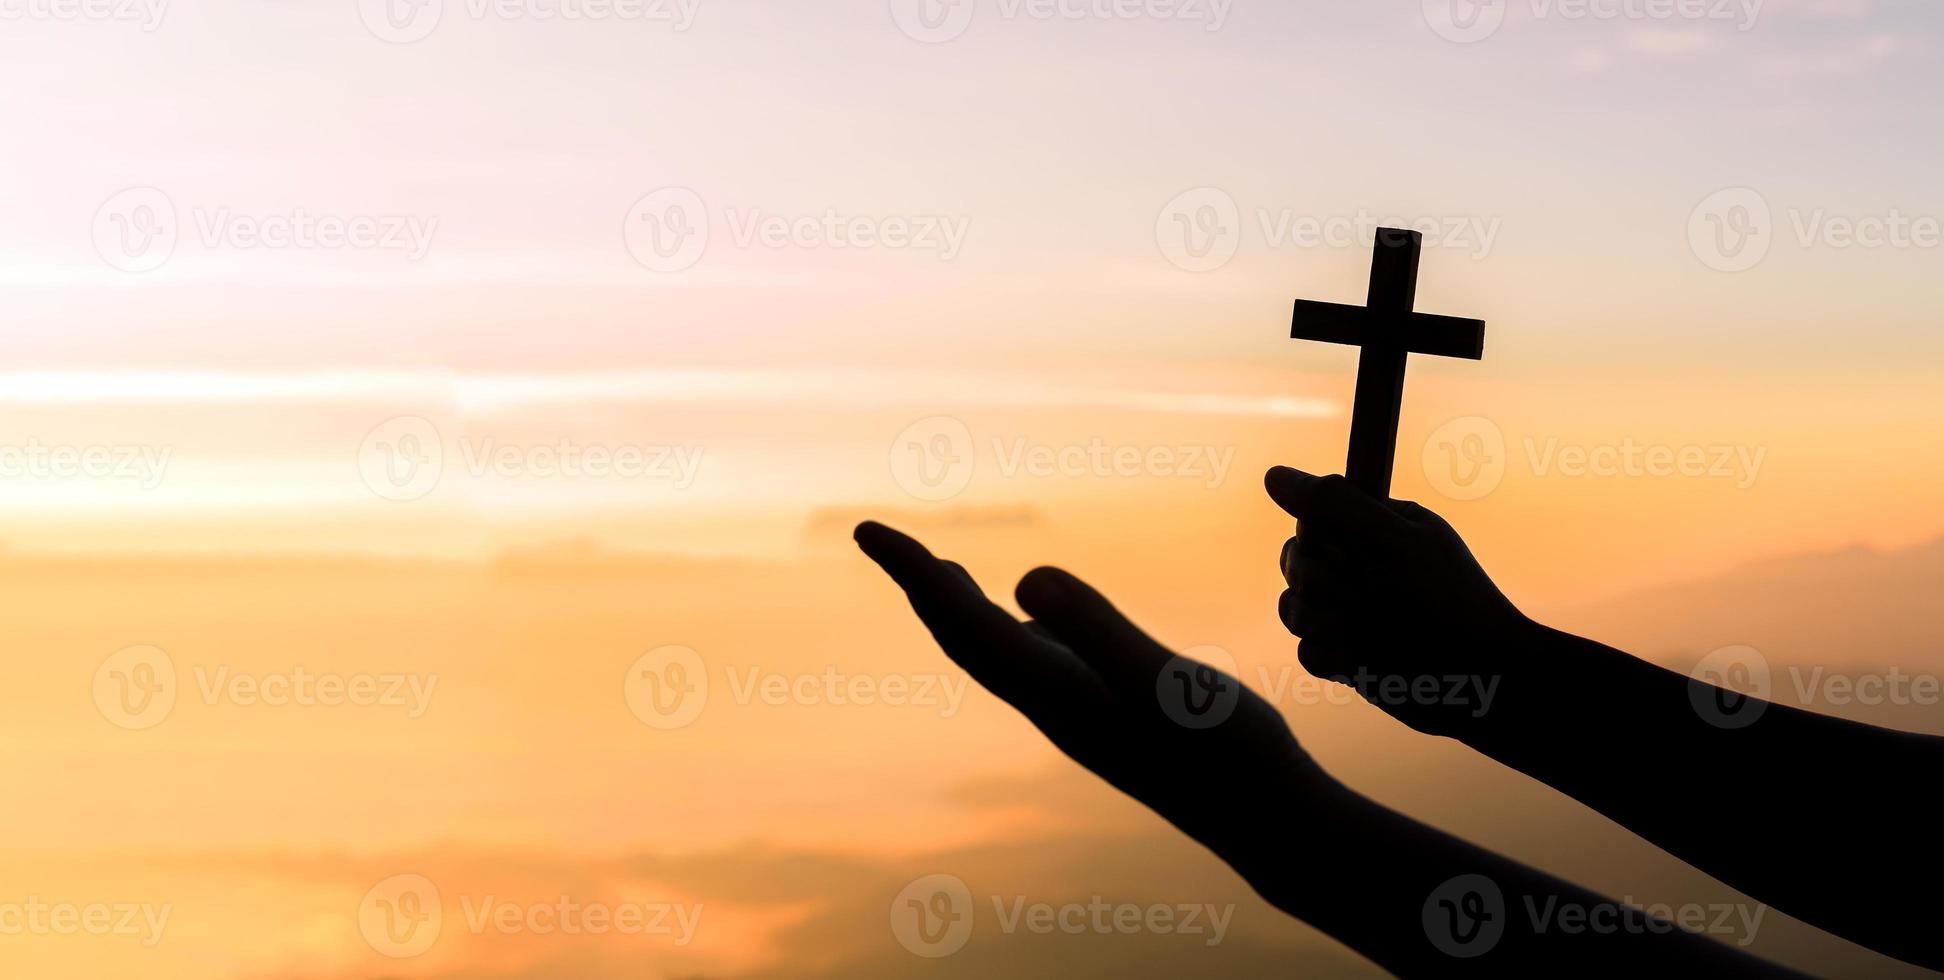 Cross is a symbol of Christianity. Human hands open palm up worship. Eucharist Therapy Bless God Helping Repent Catholic Easter Lent Mind Pray. Christian concept background. photo